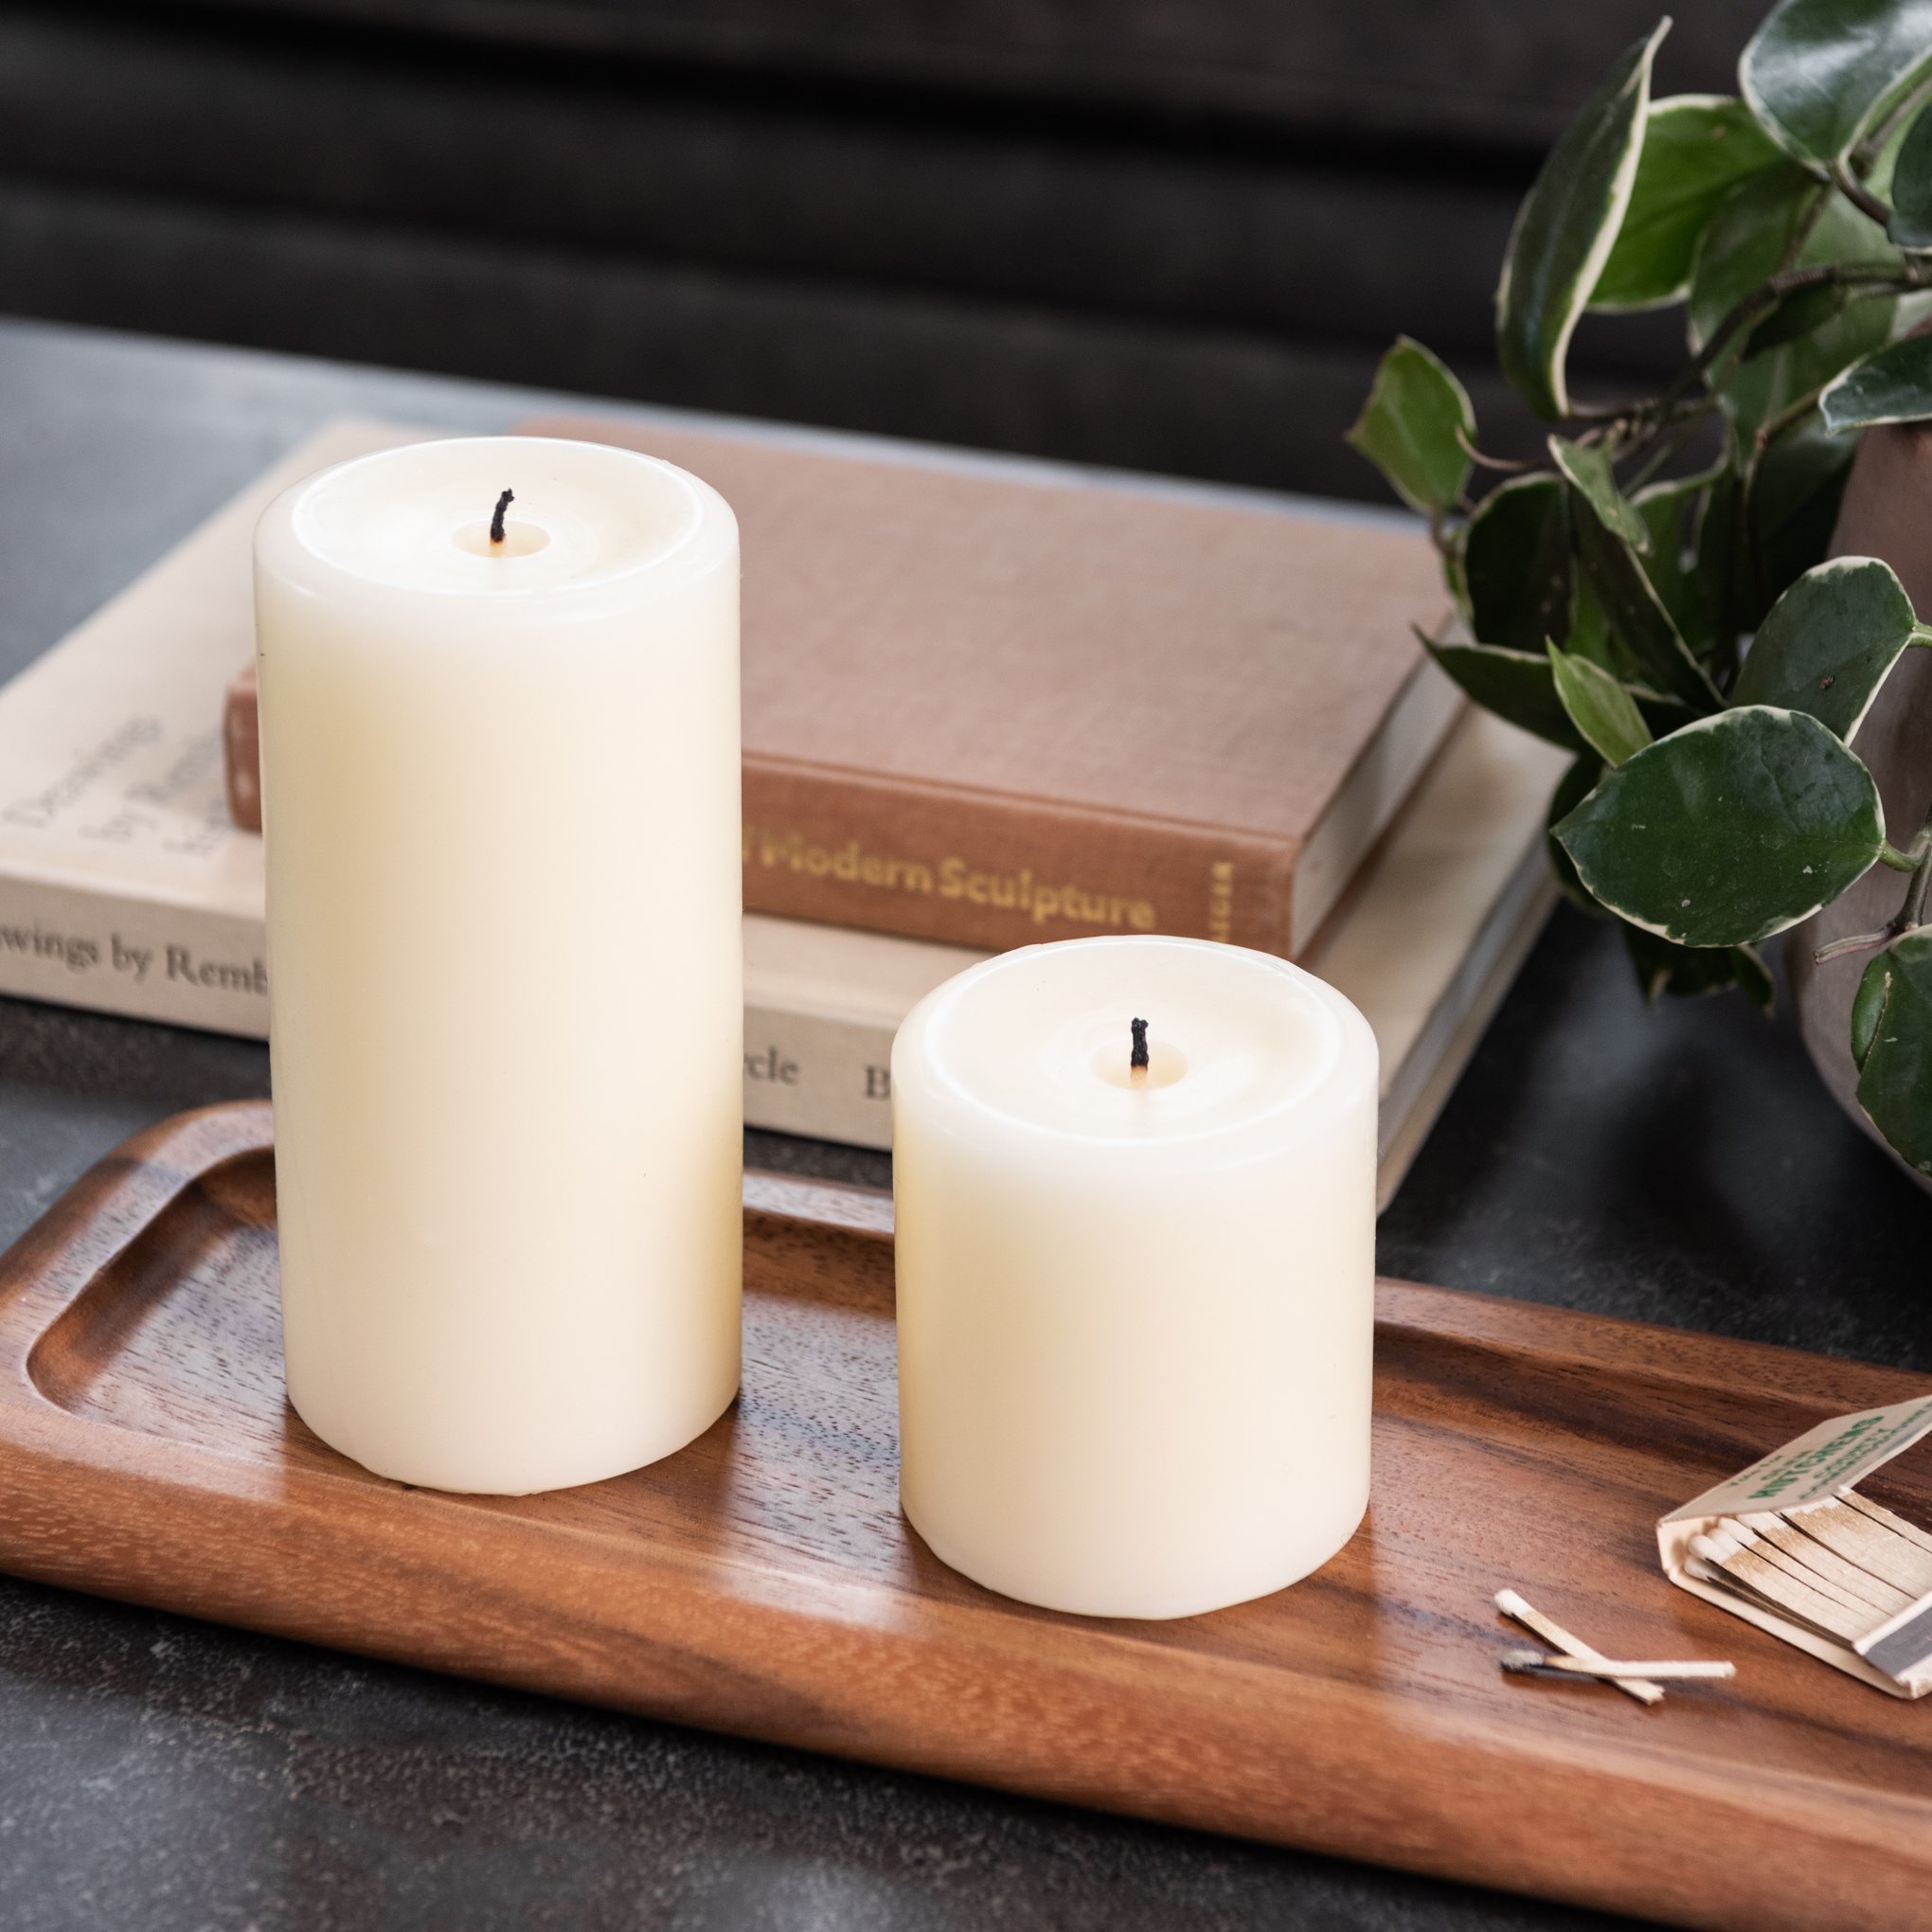 Shell White Pillar Candle On sale with items ranging from $10.40 to $17.60, discounted from $13.00 to $22.00